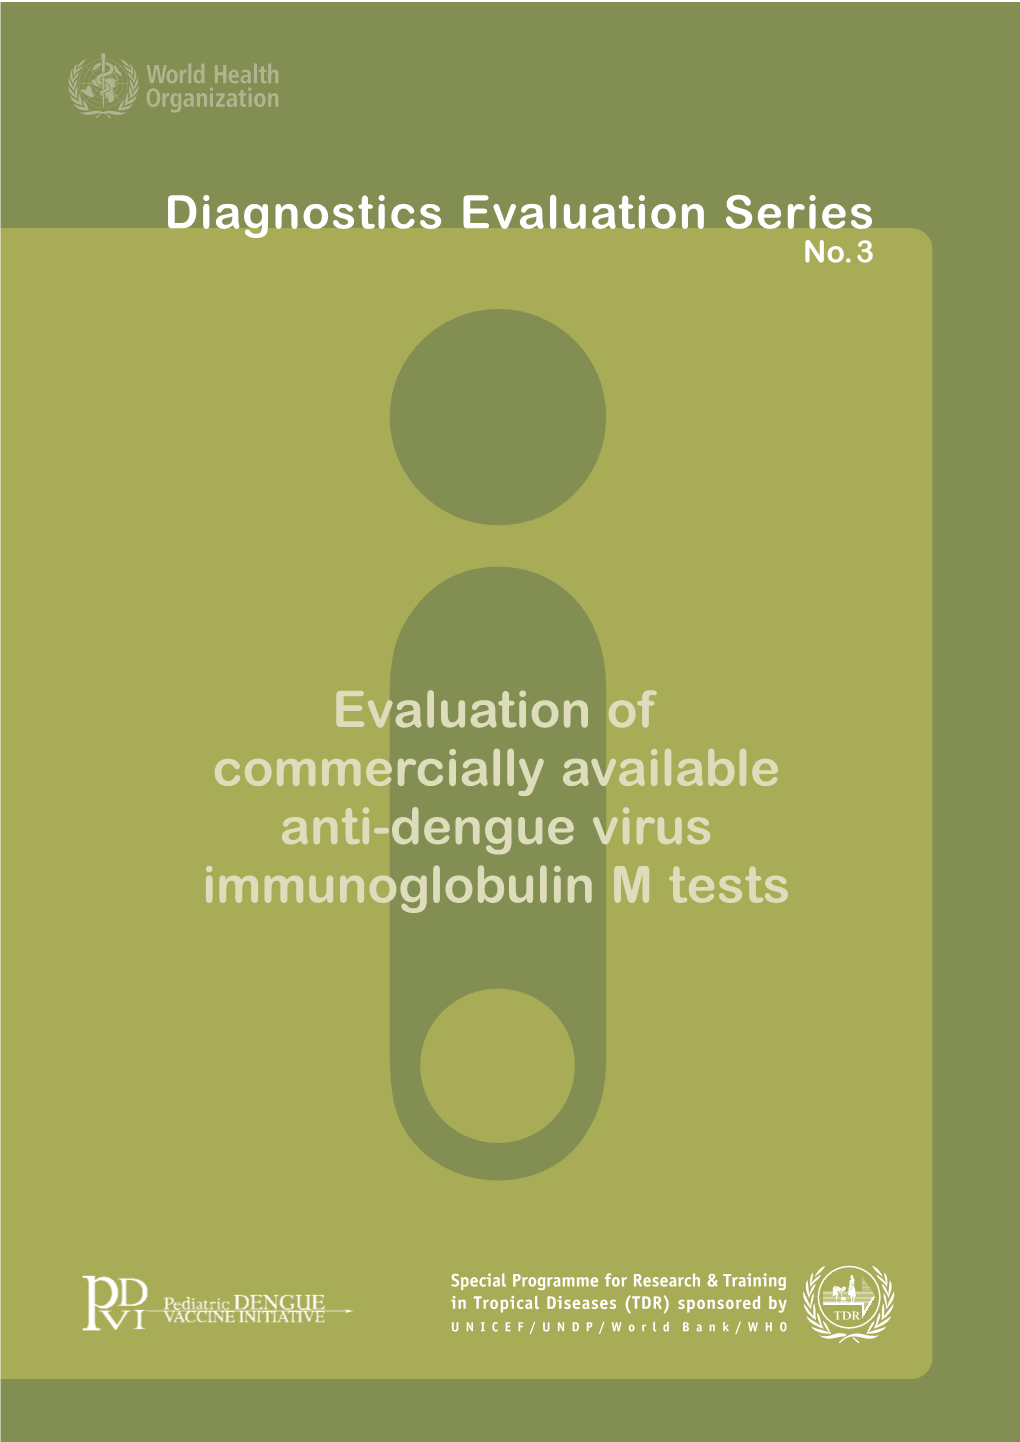 Evaluation of Commercially Available Anti-Dengue Virus Immunoglobulin M Tests